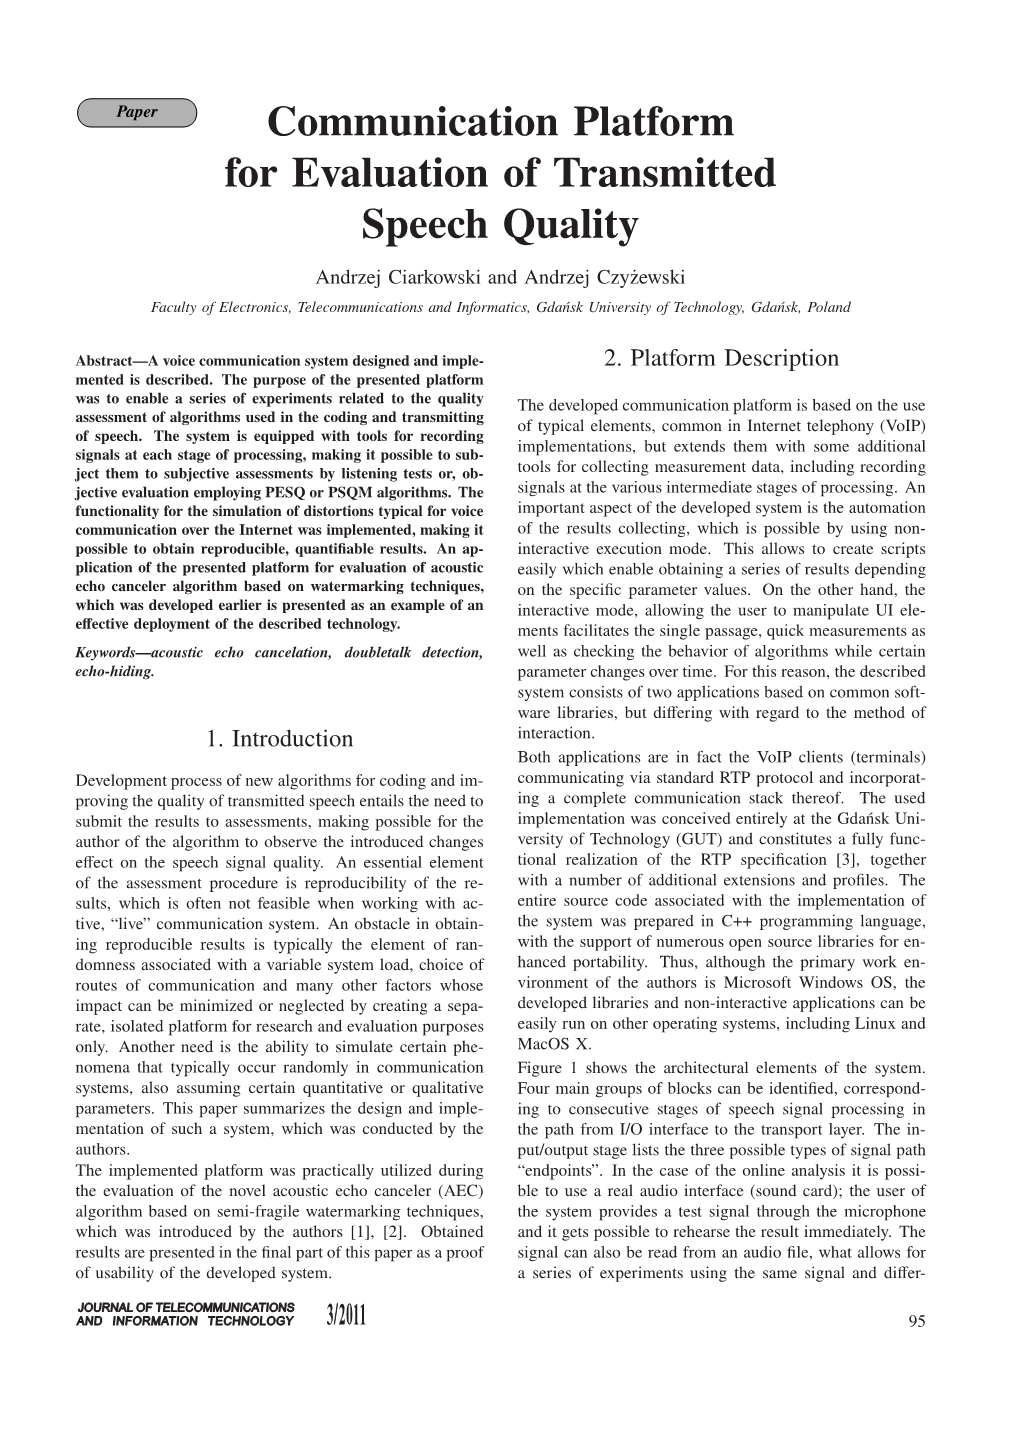 Communication Platform for Evaluation of Transmitted Speech Quality